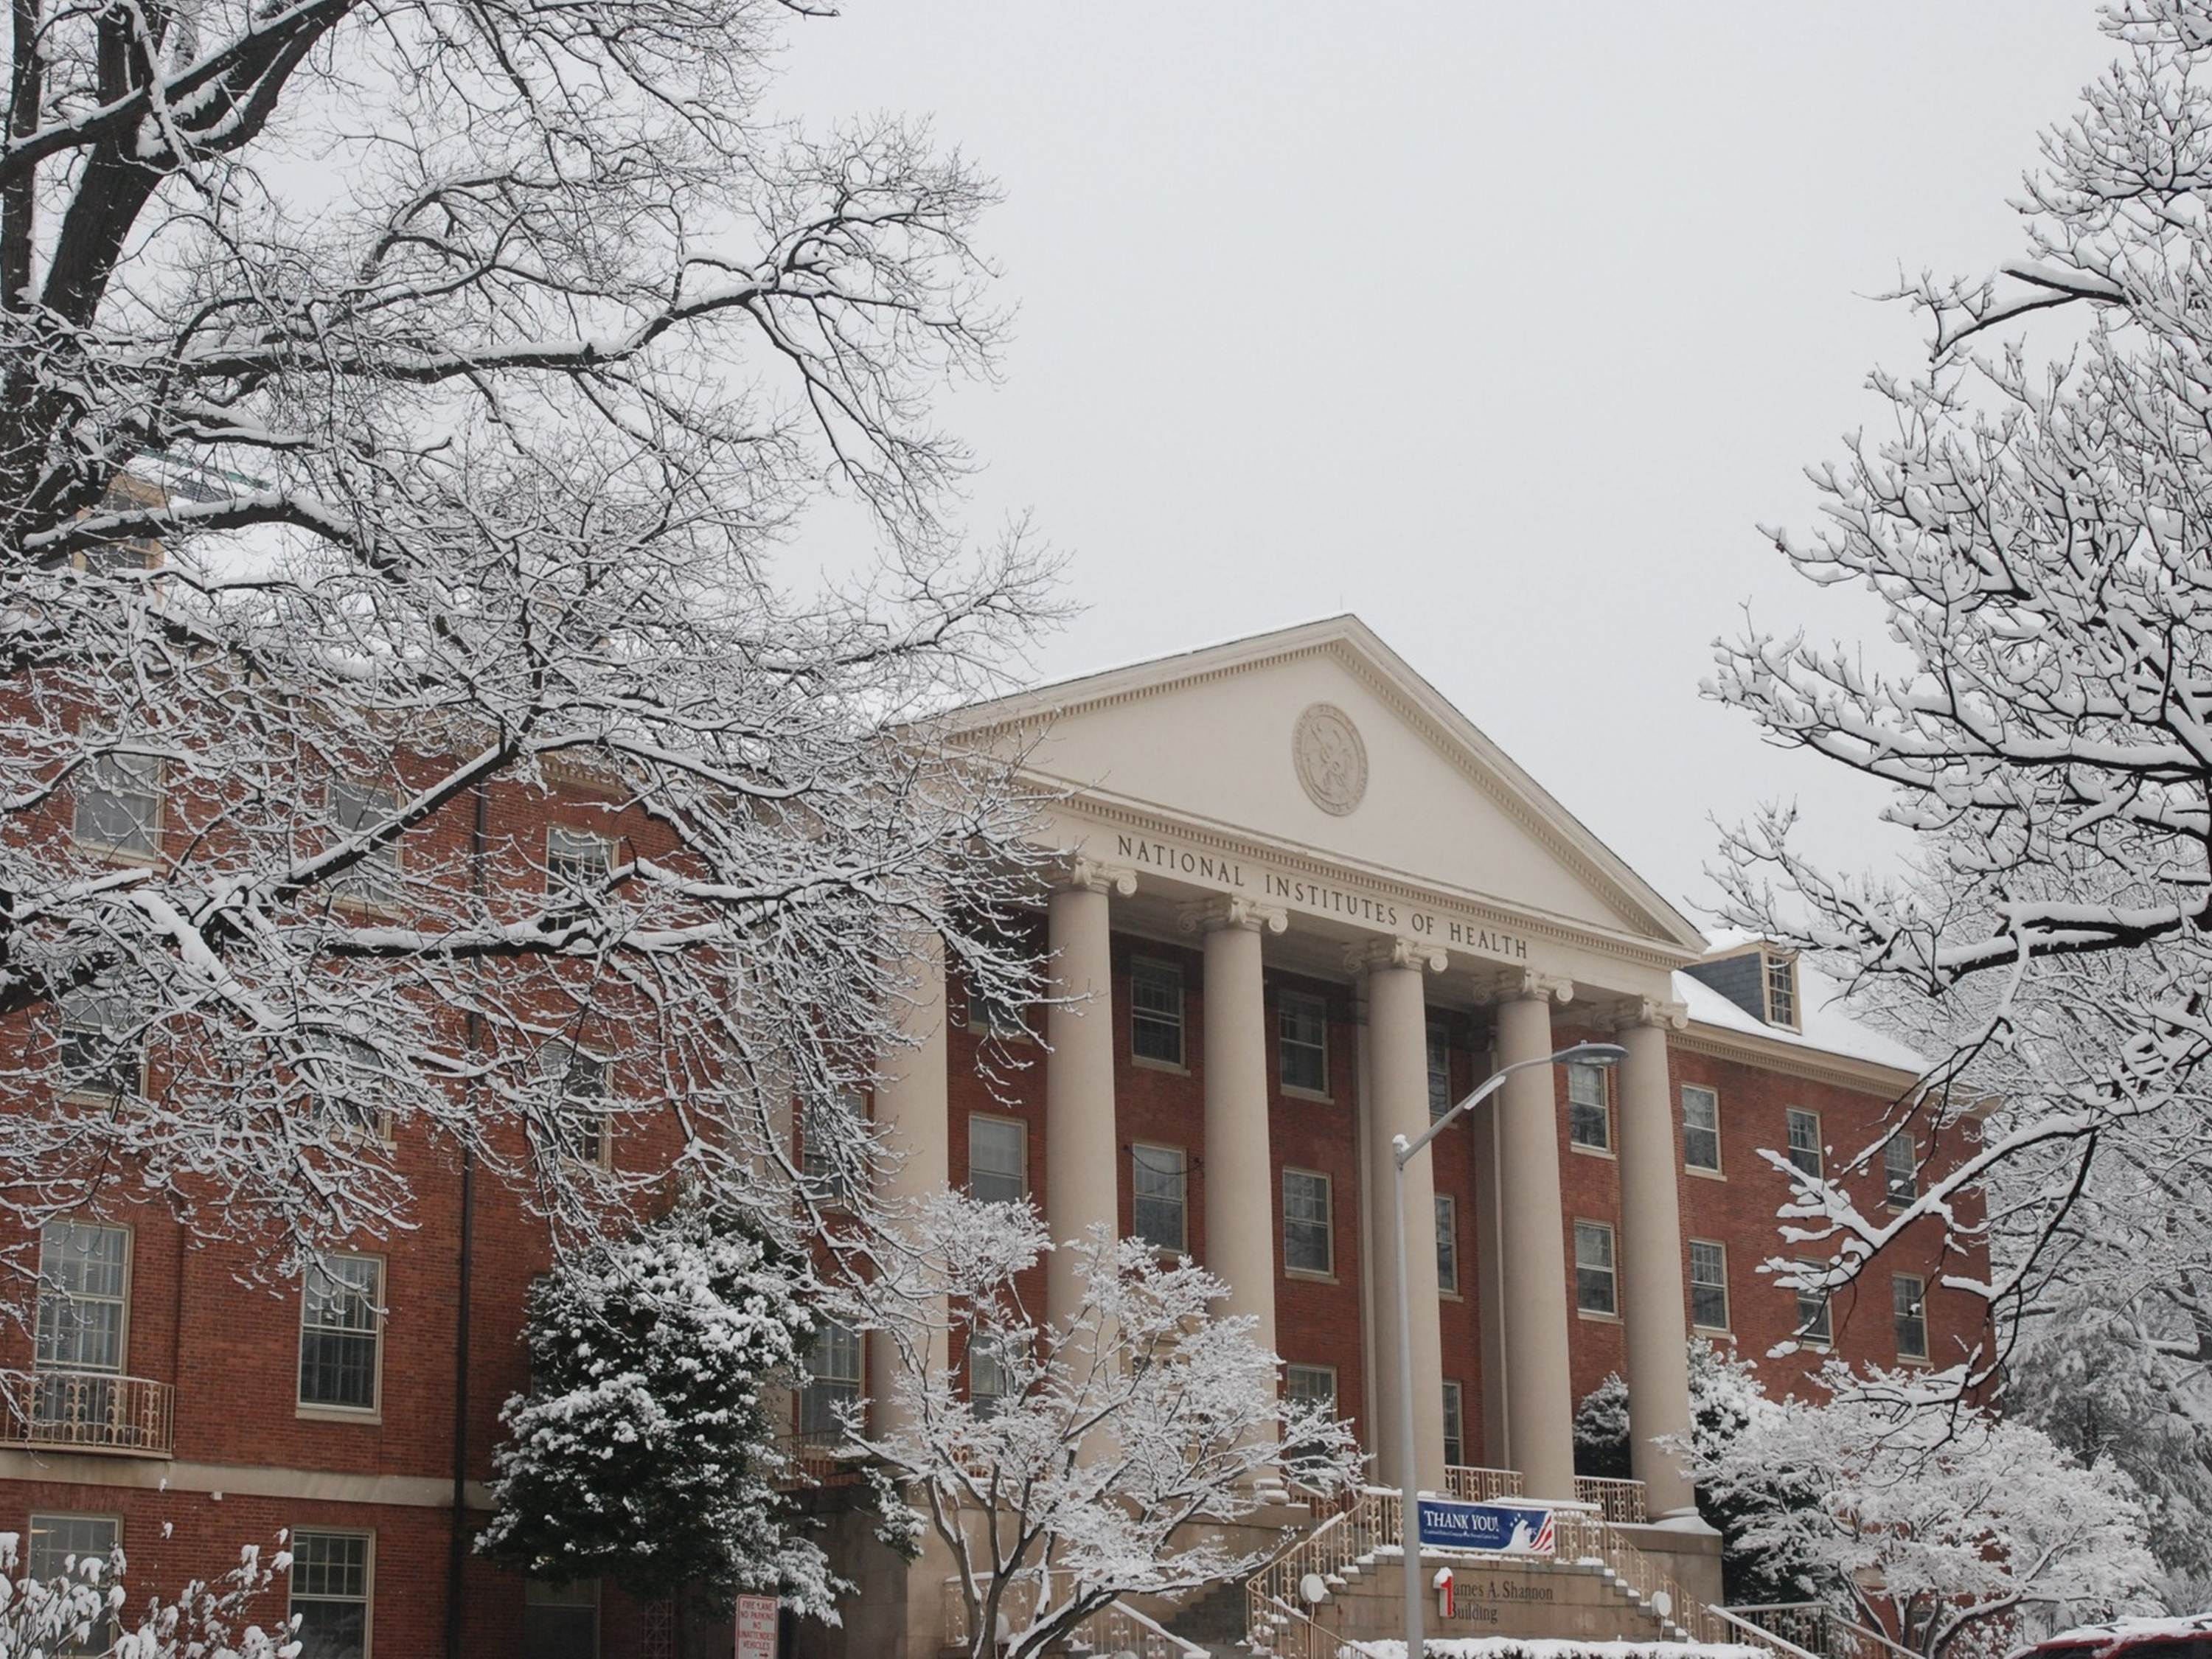 Picture of the main administrative building at NIH -- Building 1 -- in winter with snow on it and the nearby trees.